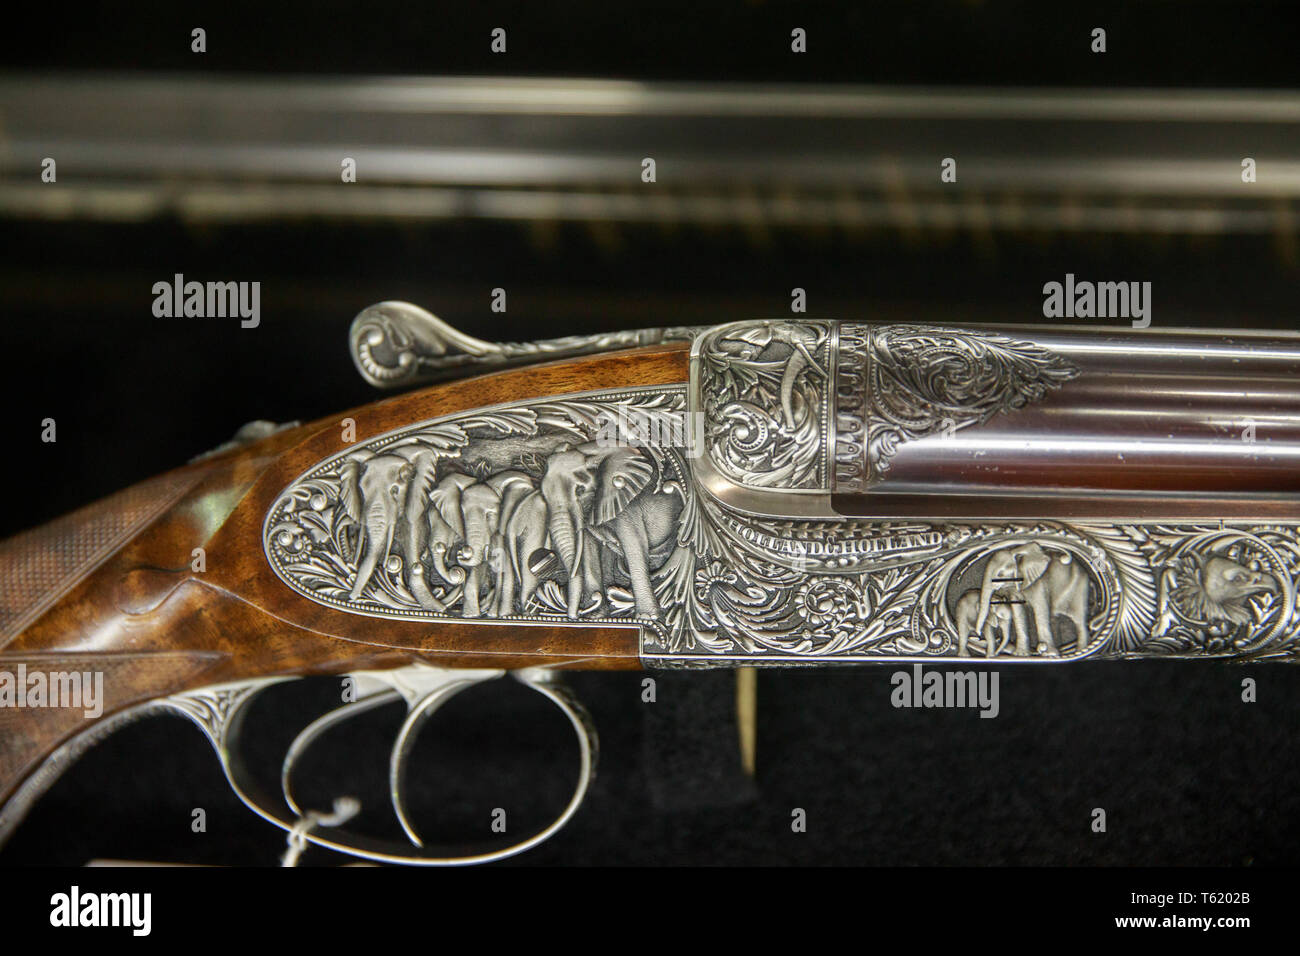 700 Nitro Express Estimated To Be Worth 225 000 To 525 000 Us Dollars On Display At The Rock Island Auction Company During The Third Day Of The National Rifle Association Convention Stock Photo Alamy